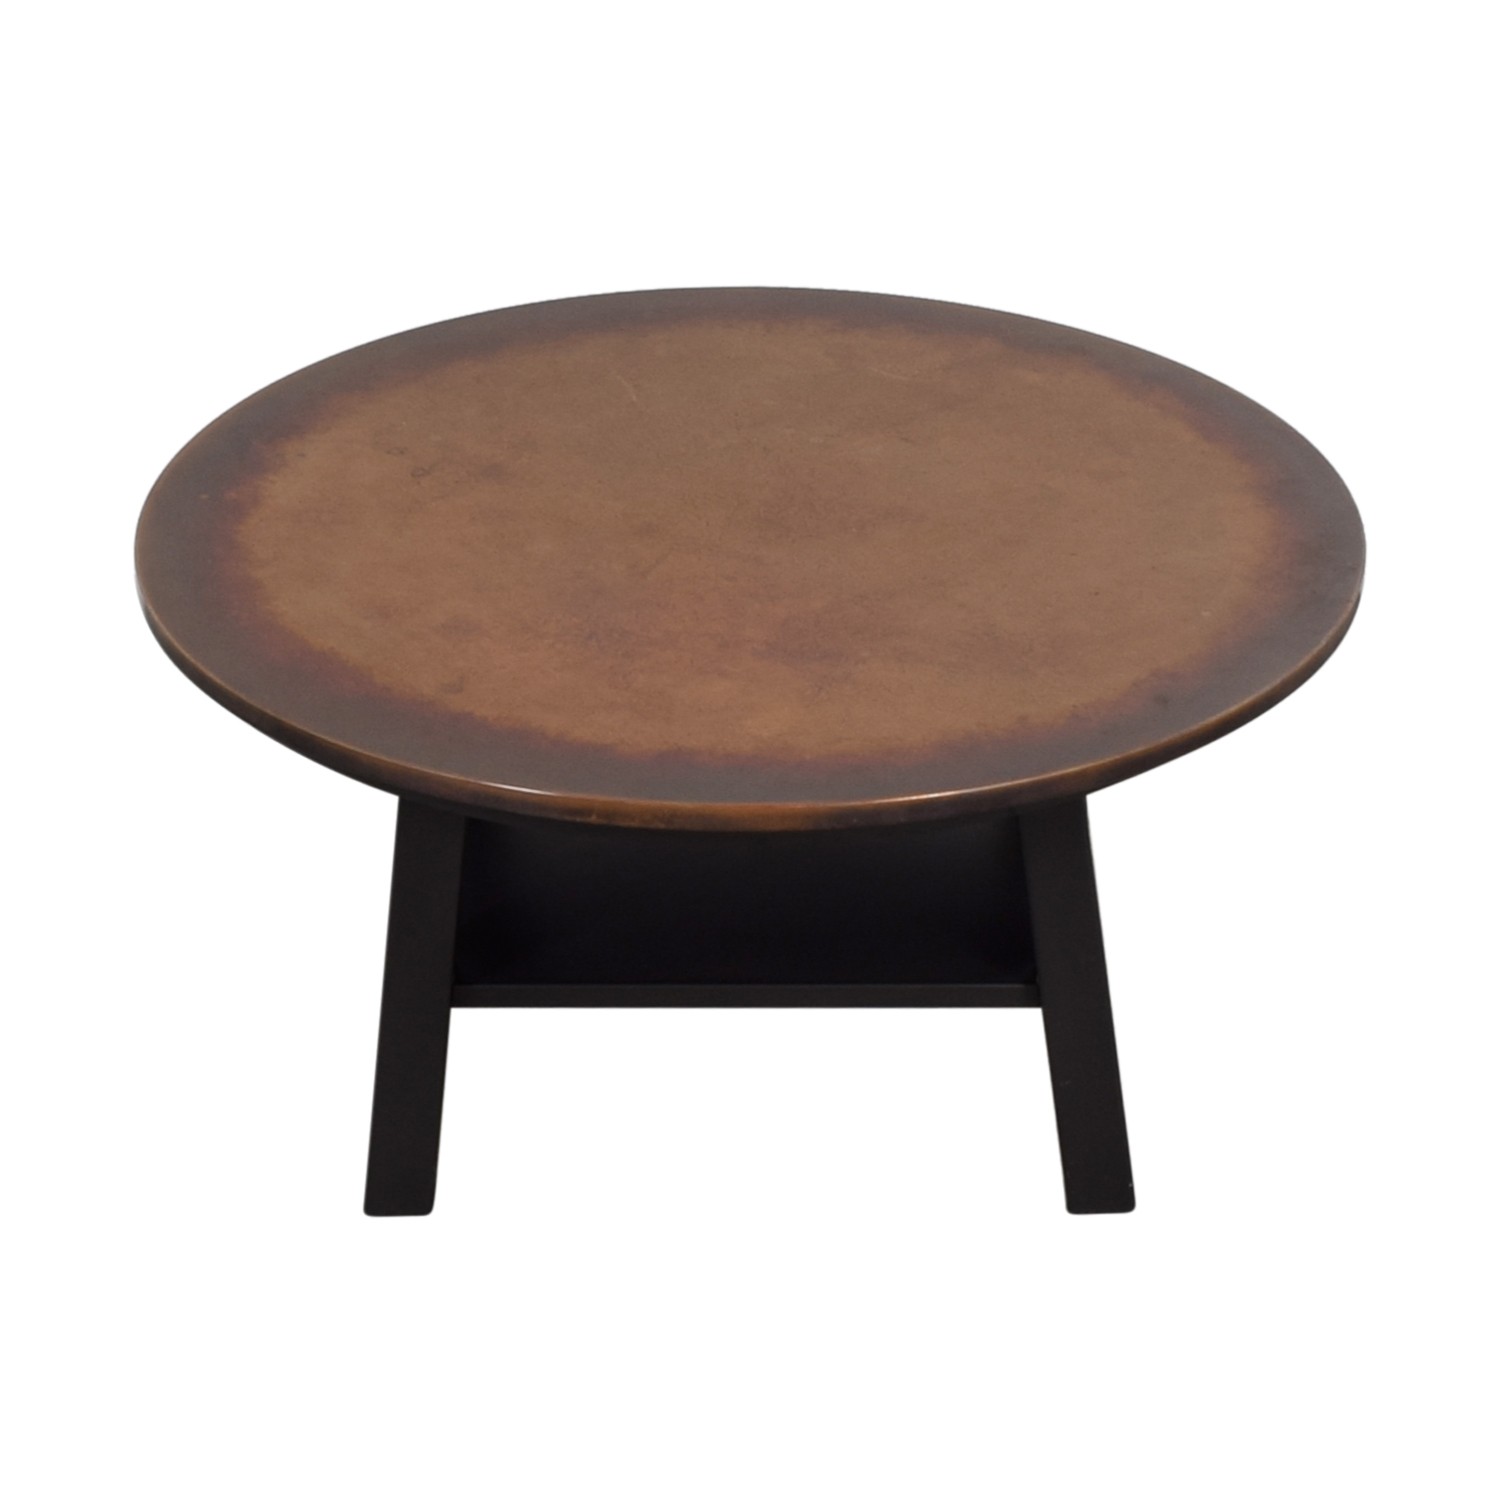 90 off round copper top coffee table tables